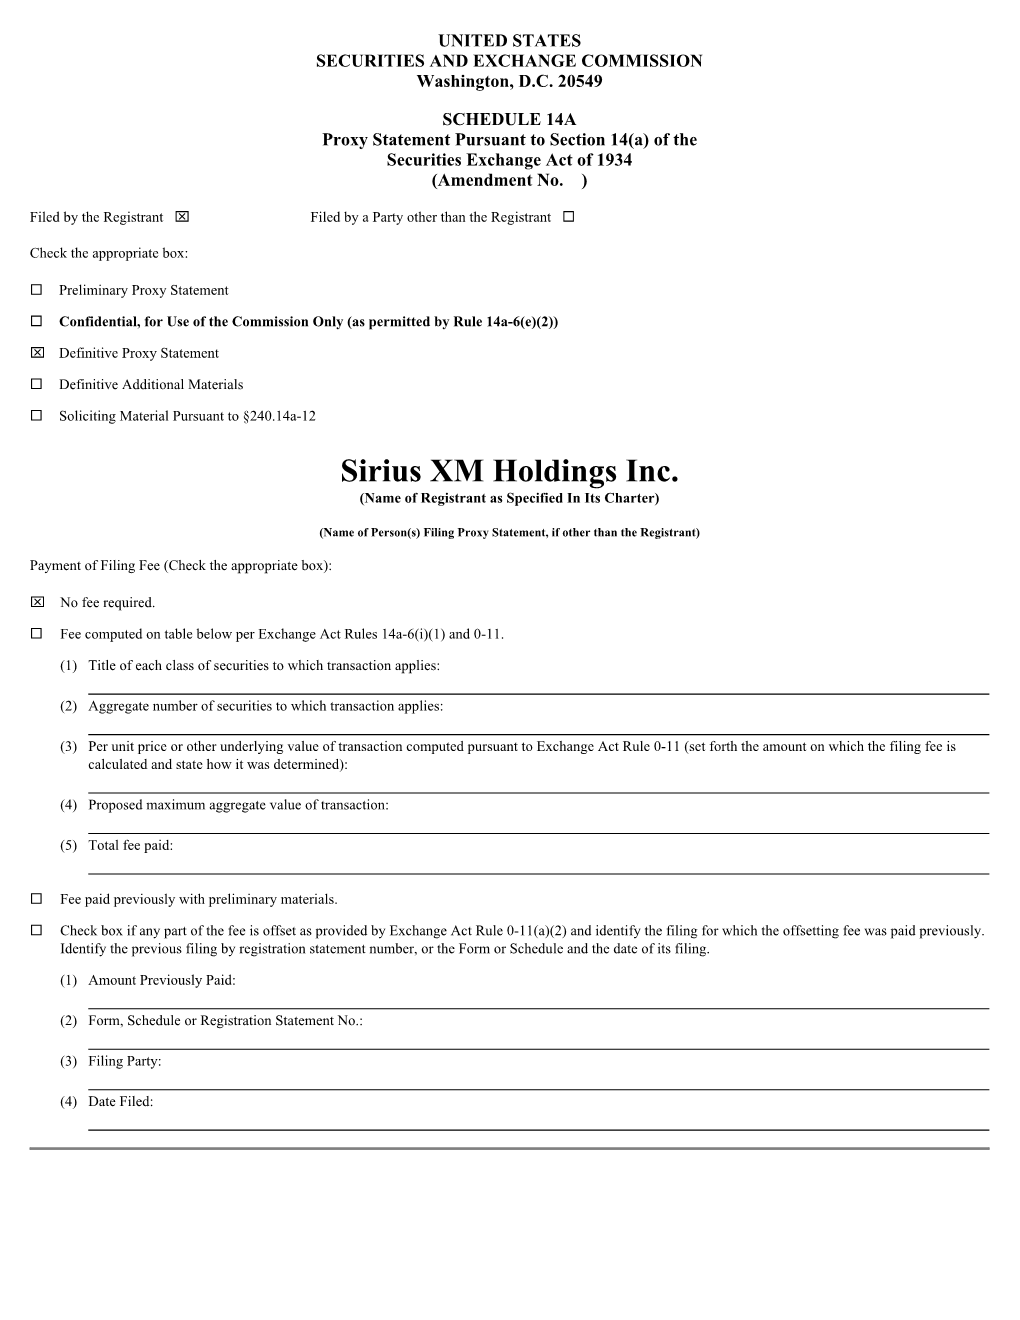 Sirius XM Holdings Inc. (Name of Registrant As Specified in Its Charter)